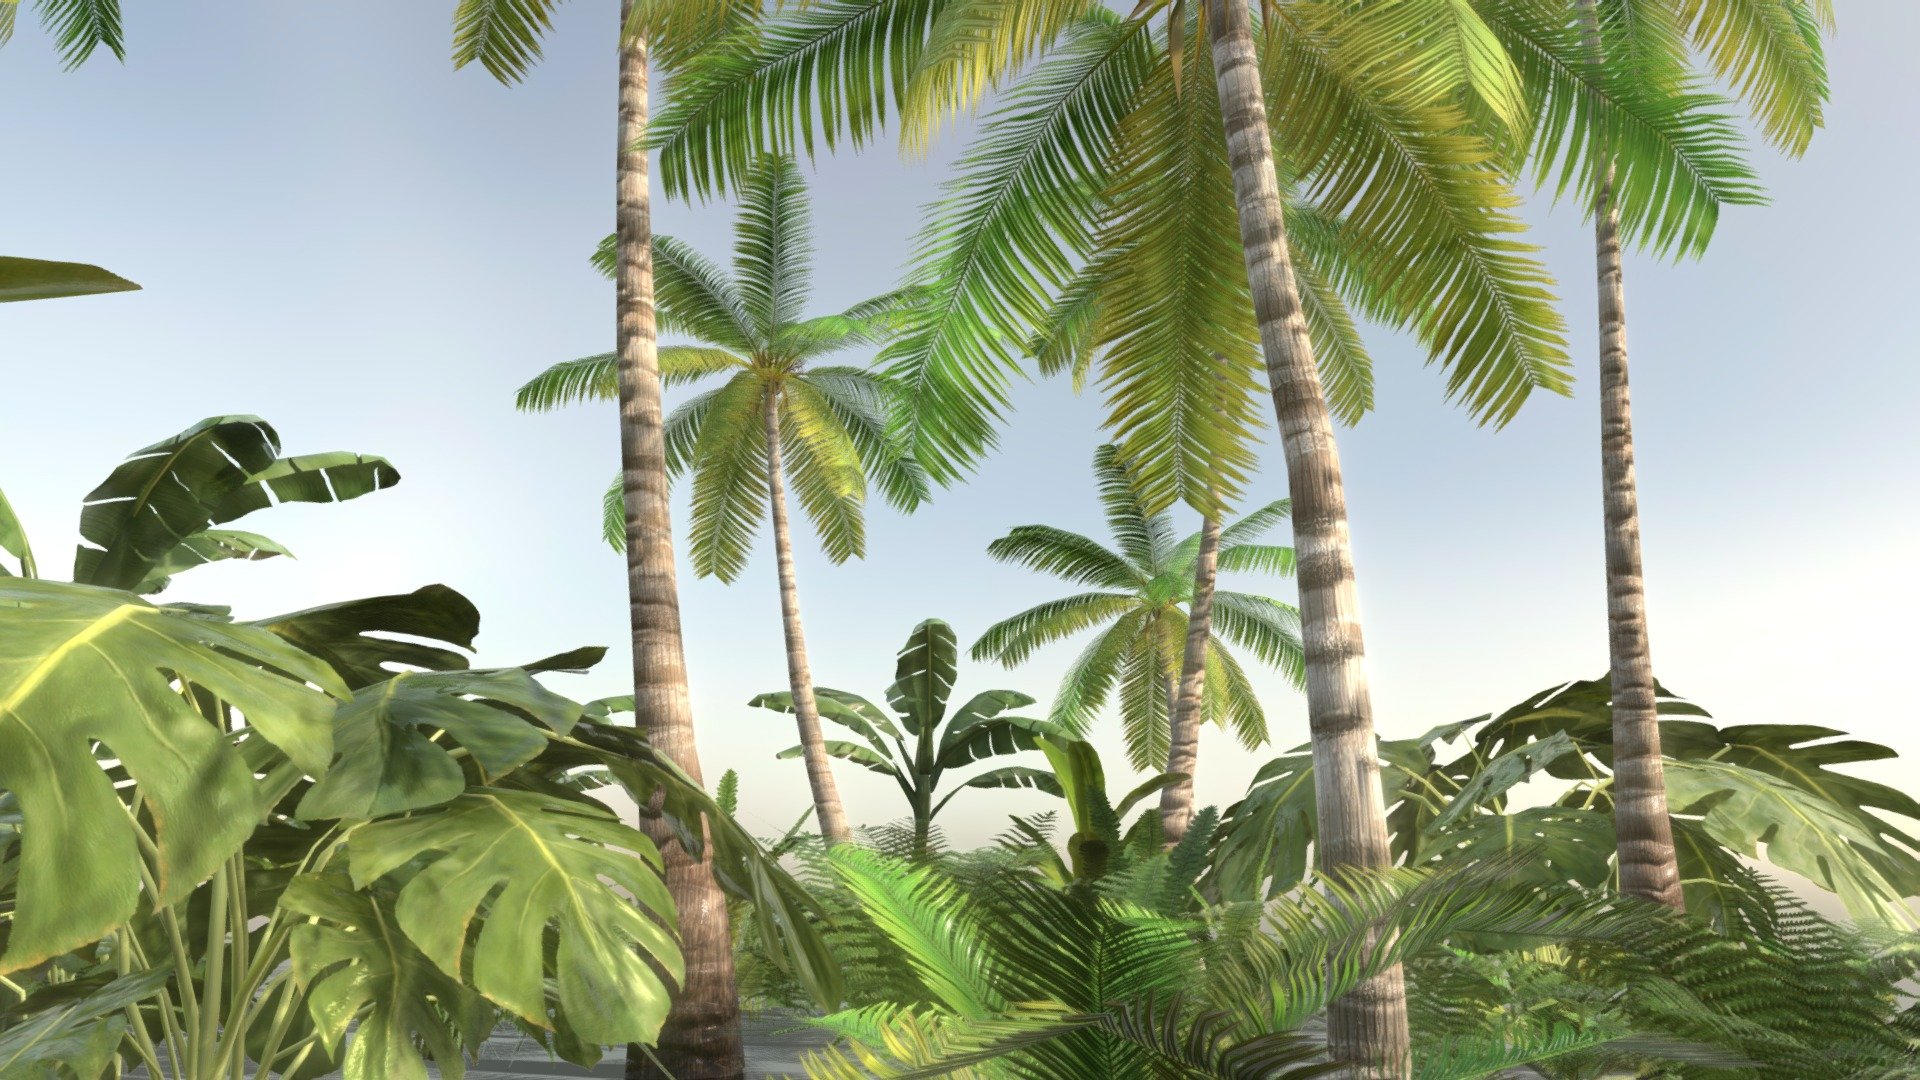 This a low-poly pack containing several variations of tropical vegetation with PBR materials and LODs.

There are 3 variations of the palm tree, each having an extra LOD level, the tree parts are detached from each other(trunk, leaves, dry leaves, etc.).
Polycount (tris/verts):
palm 1: 3028 / 2528, lod: 1571 / 1409
palm 2: 3028 / 2528, lod: 1589 / 1431
palm 3: 2488/ 2082, lod: 1427 / 1267
palm bush: 272/ 255, lod: 111 / 145

Bushes:
fern big 695 / 535 , lod: 379 / 327
fern small: 413 / 321, lod: 211 / 185
fern tropical: 134 / 158, lod: 92 / 116
tropical plant big: 1404 / 959, lod: 1082 / 760
tropical plant small: 376 / 278, lod: 248 / 204
palm plant: 788 / 669, lod: 306 / 358

Banana plant:
big: 1334 / 862, lod: 647 / 478
small: 904 / 595, lod: 390 / 299

NOTE. The inner have duplicated geometry to avoid use of two-sided materials 3d model